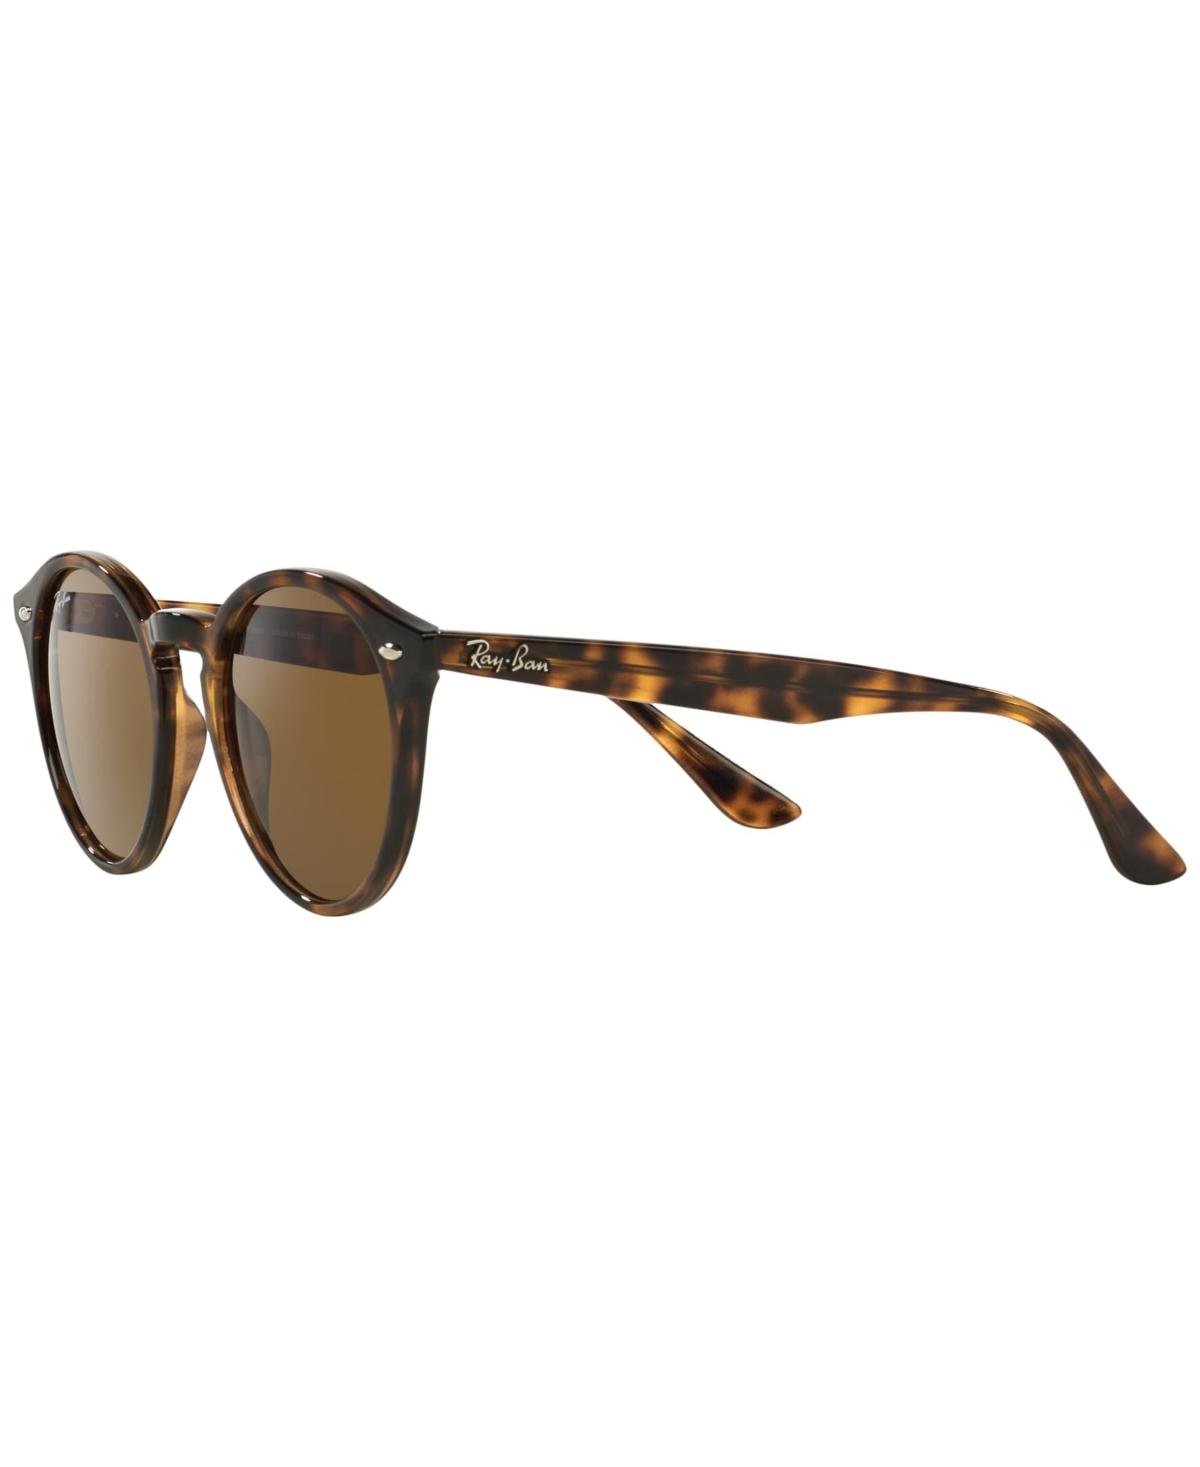 Ray-Ban Wells Xl Polarized Sunglasses in Brown | Lyst